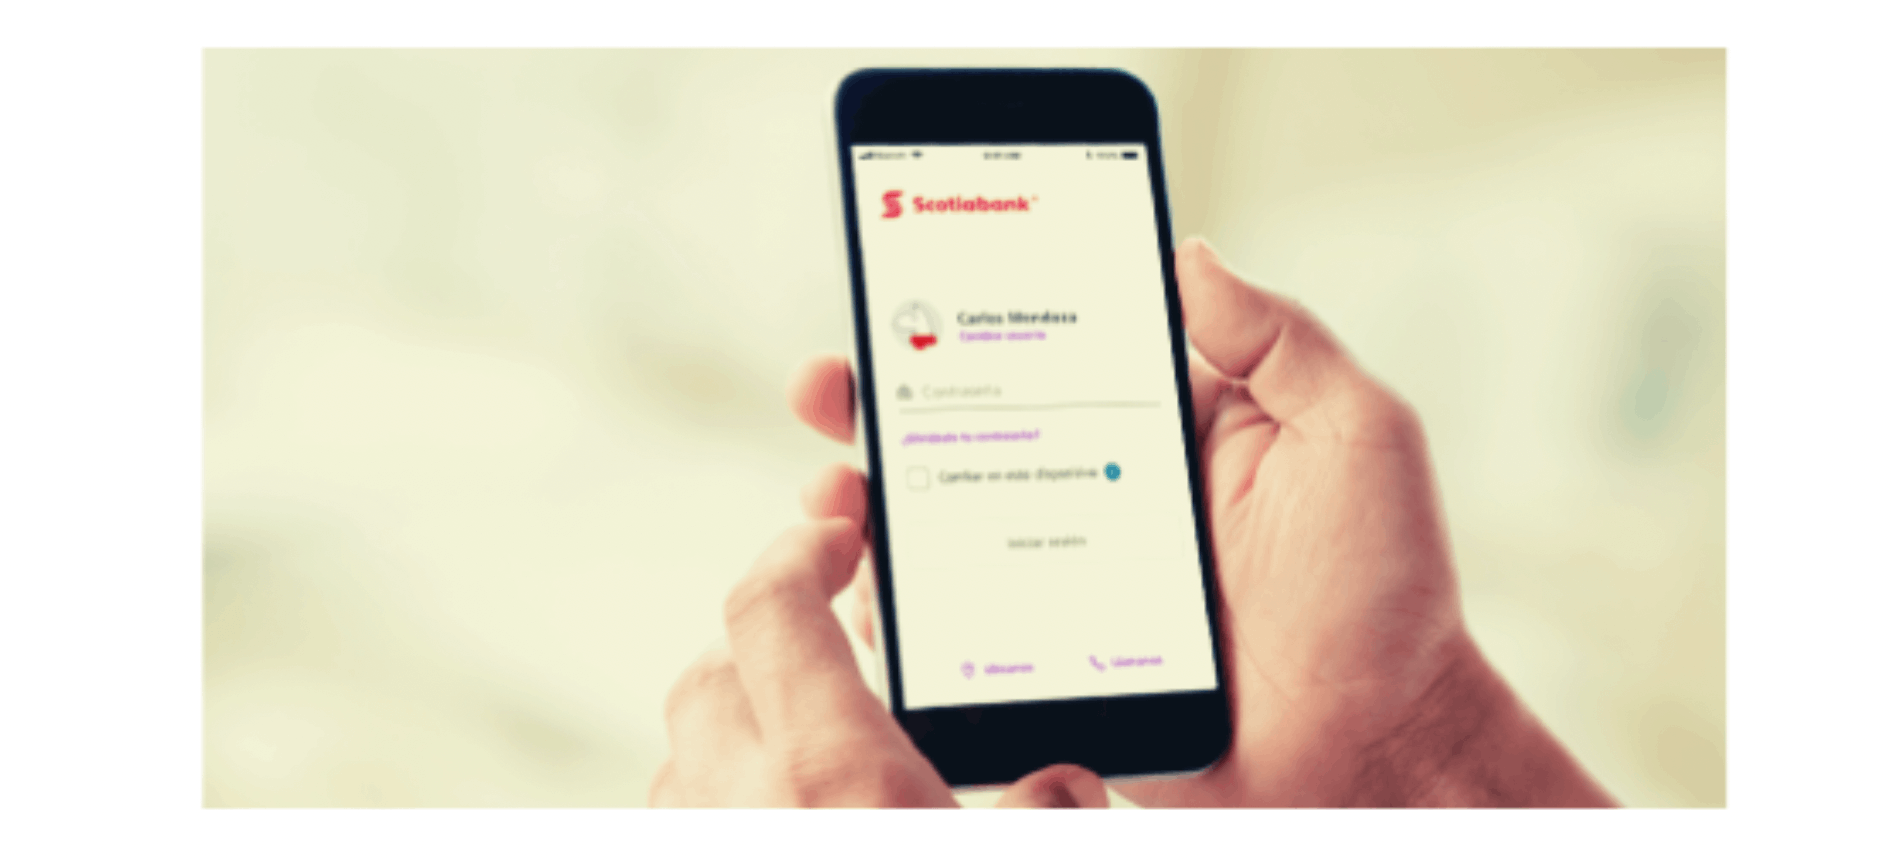 Scotiabank App – Learn How to Download and Apply for a Card